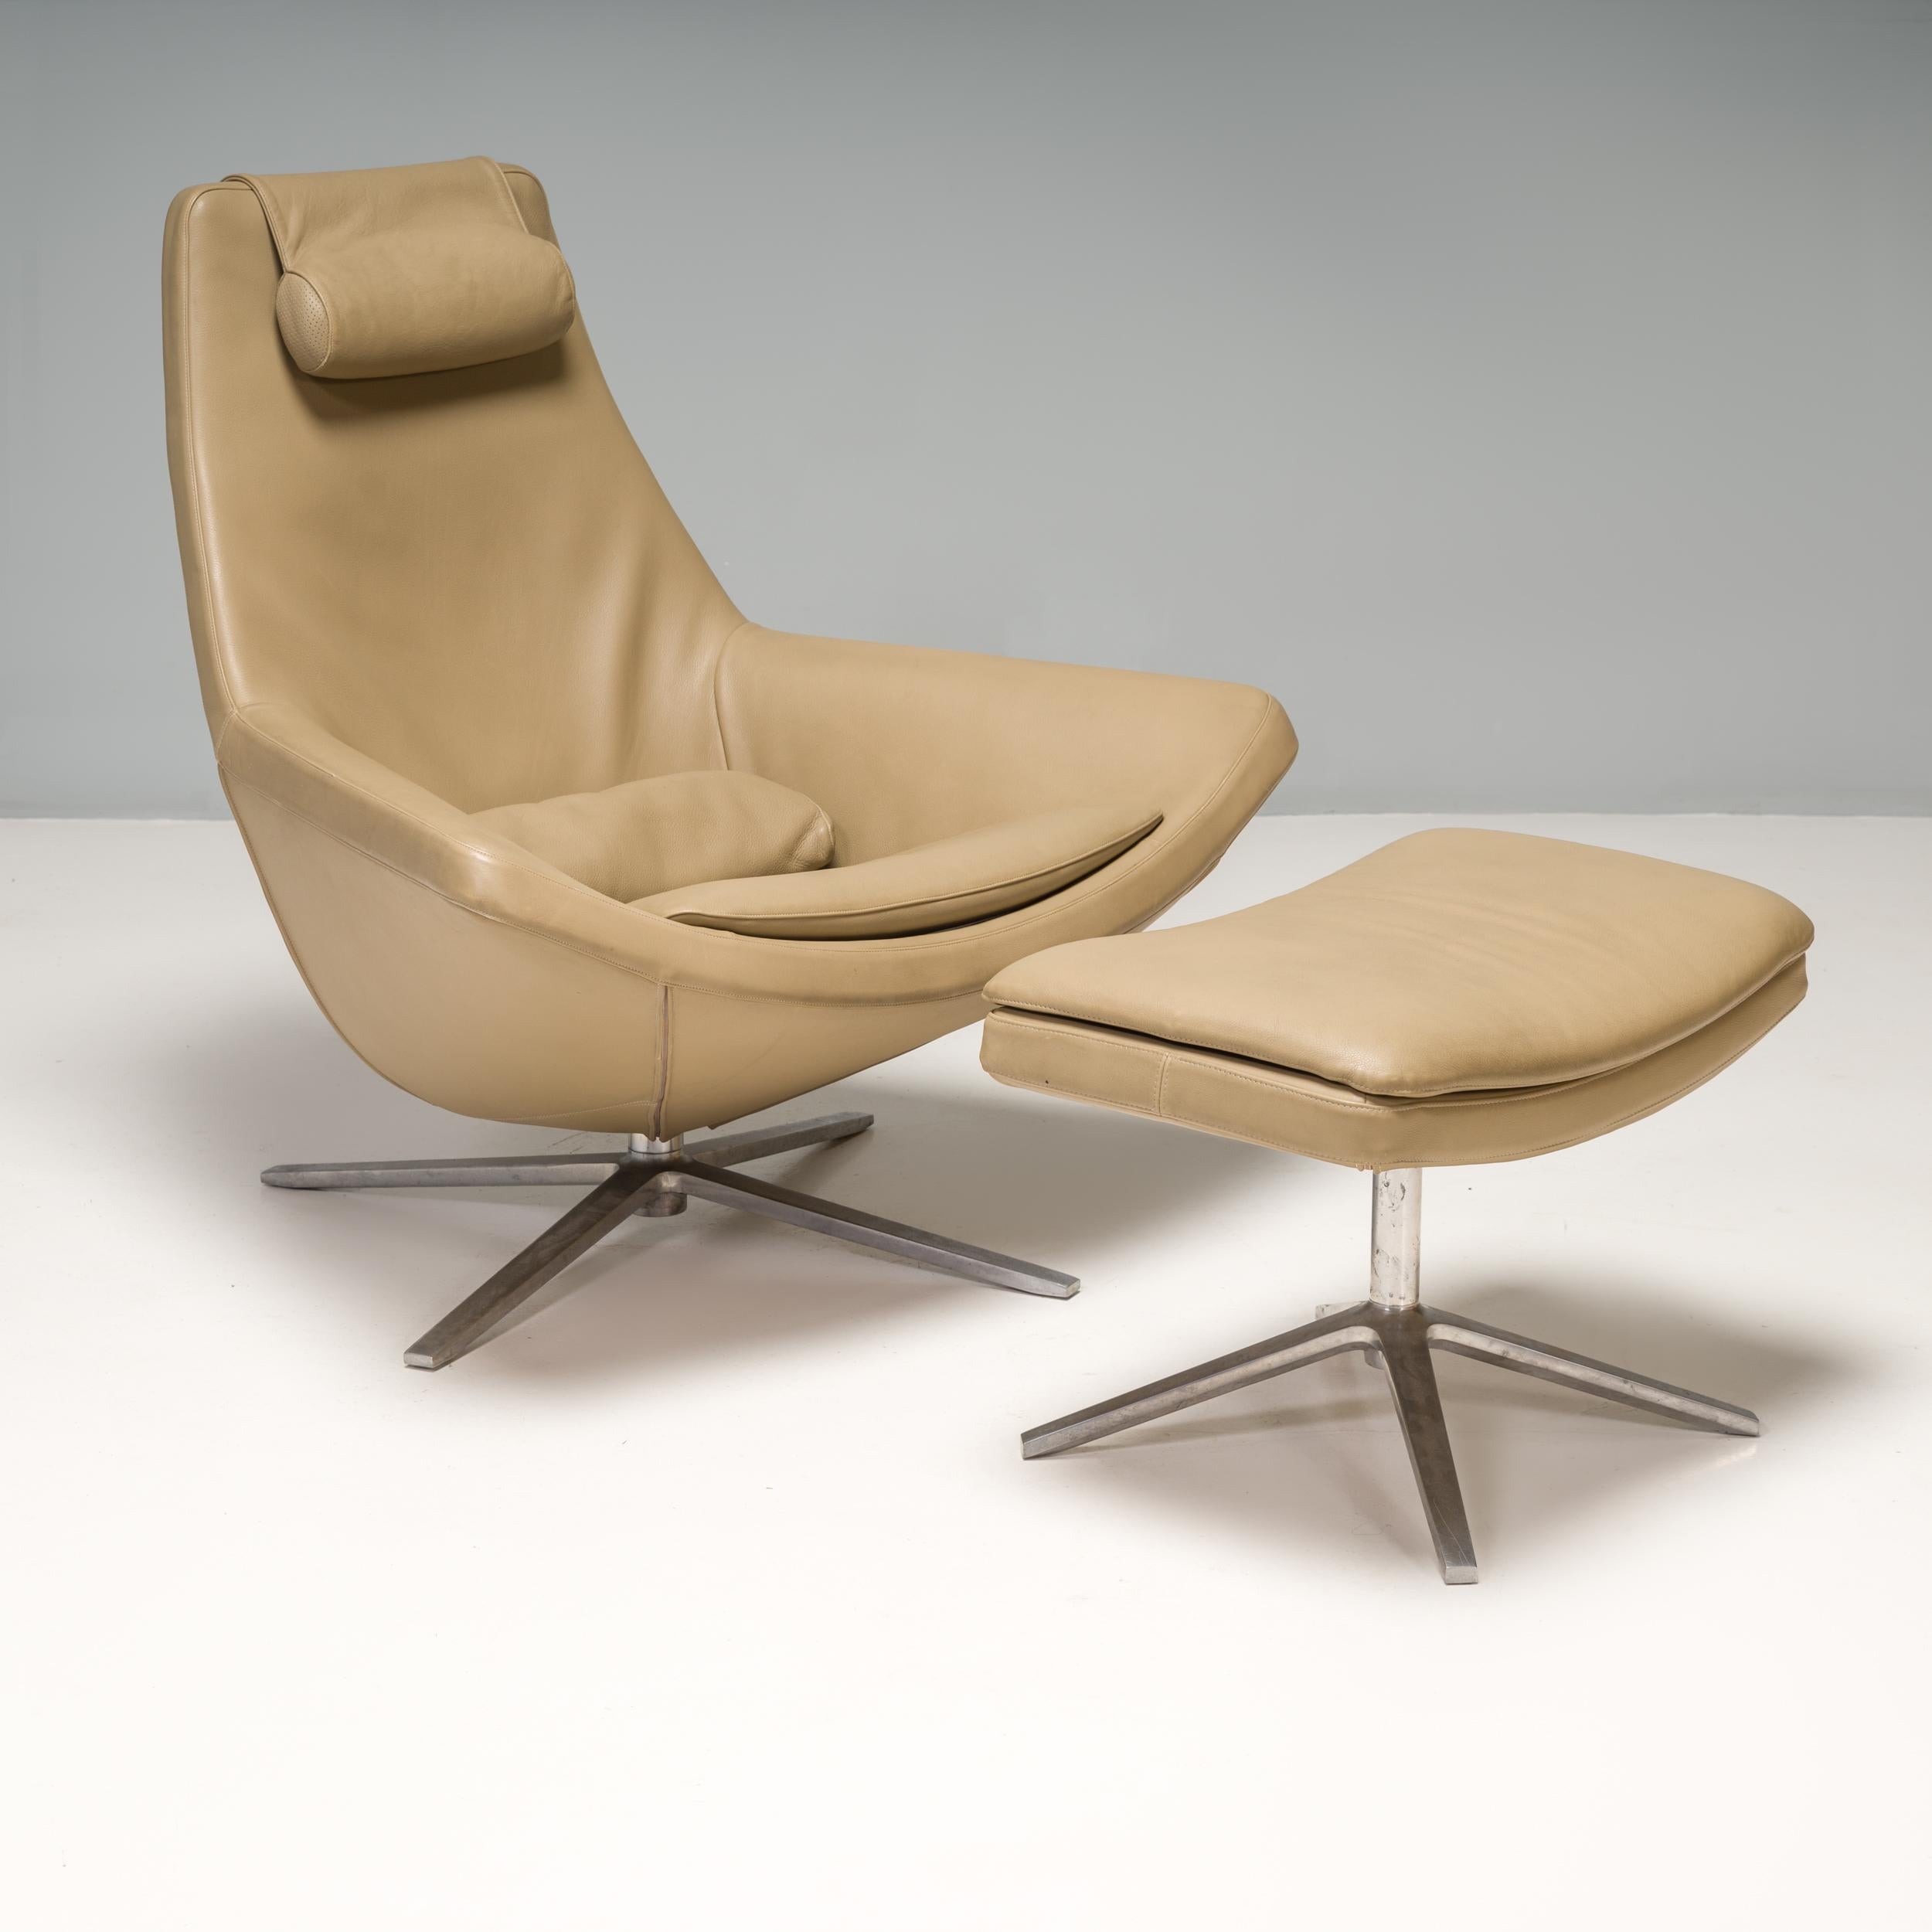 Designed by Jeffrey Bernett for B&B Italia in 2003, the Metropolitan ME100/1 armchair is a larger version of the original Metropolitan chair.

Upholstered in beige leather, the armchair features a seat that flows uninterruptedly into angular arm